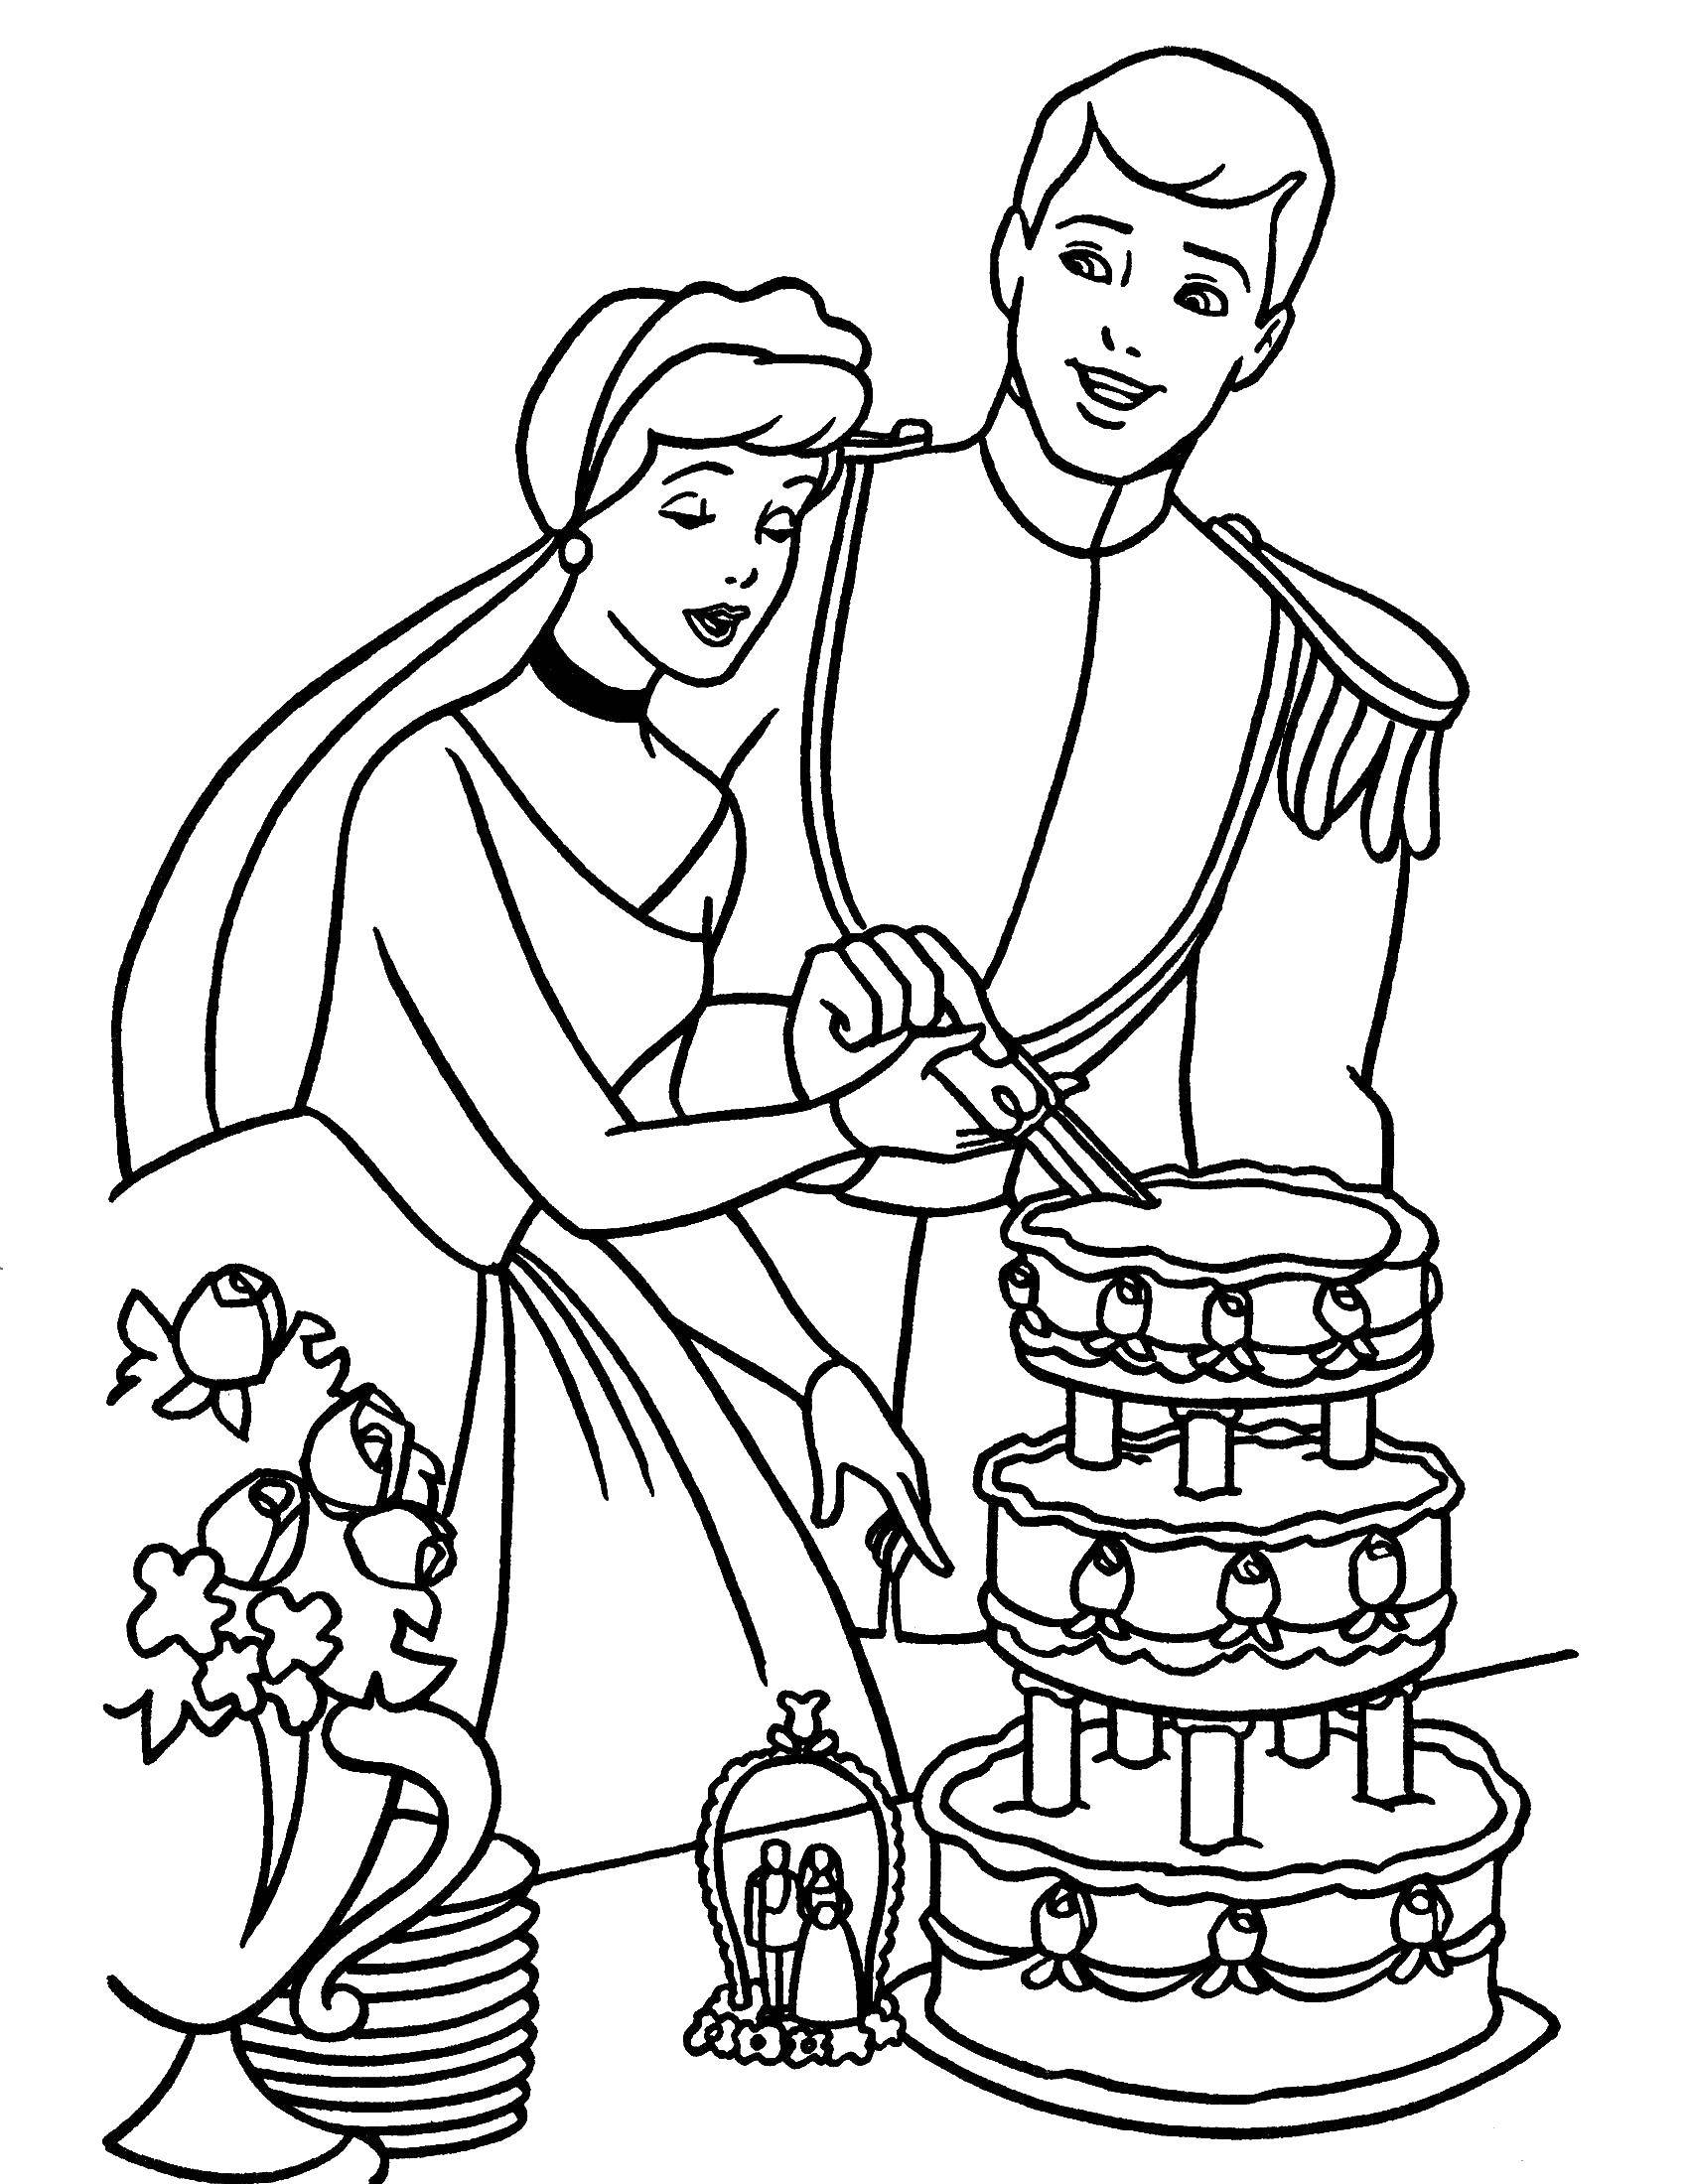 Coloring Cinderella and the Prince at the wedding cut the cake. Category Cinderella and the Prince. Tags:  Cinderella.